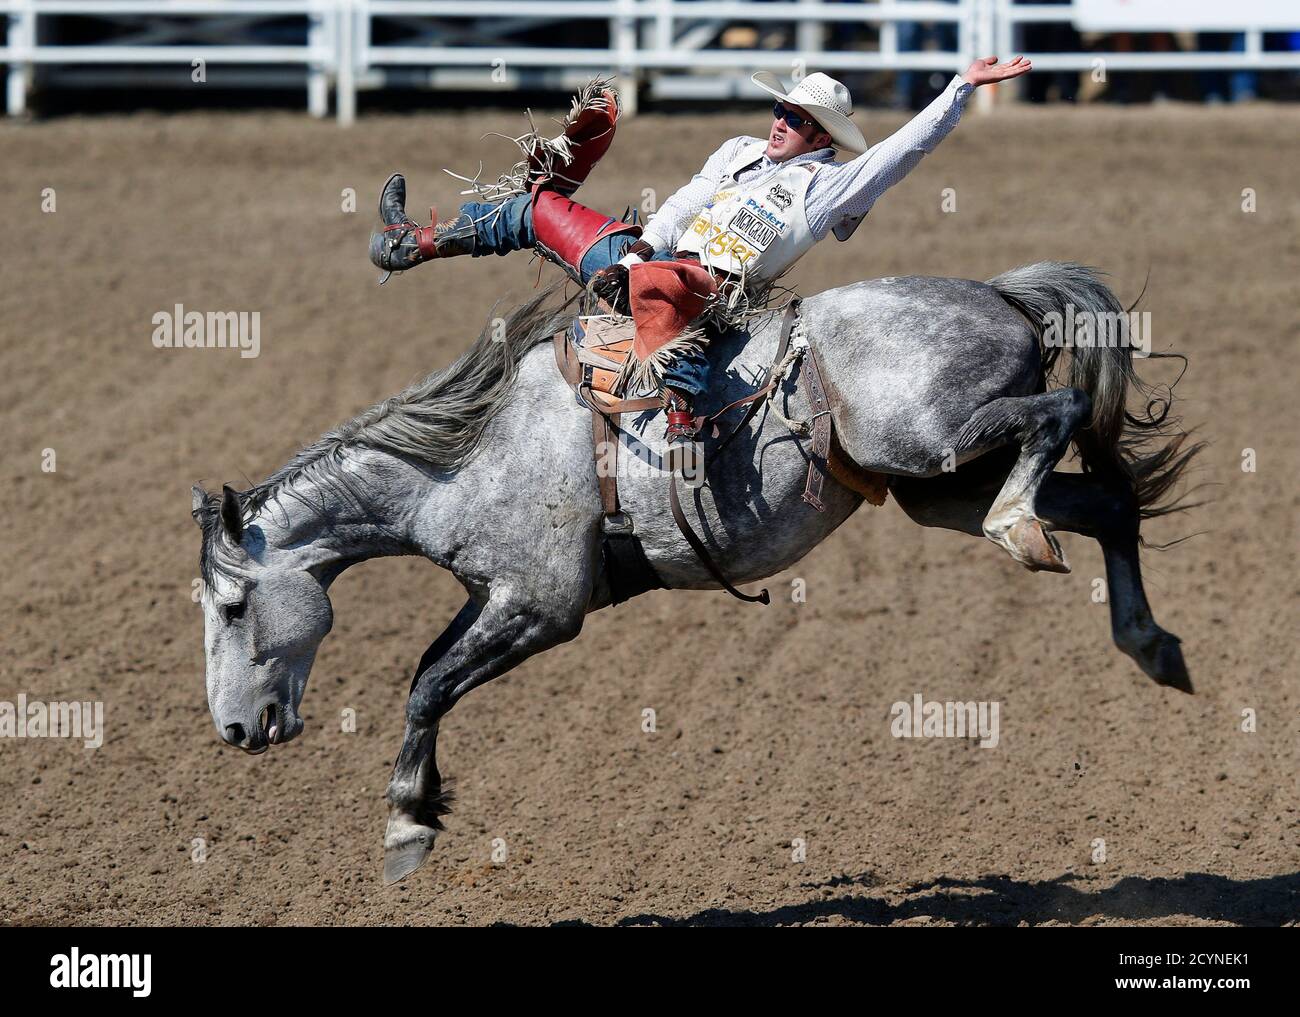 Kaycee Field of Spanish Fork, Utah, rides the horse Mucho Dinero to a first place finish in the bareback event during the final day of the Calgary Stampede rodeo in Calgary, Alberta, July 13, 2014. REUTERS/Todd Korol  (CANADA - Tags: SPORT ANIMALS SOCIETY) Stock Photo